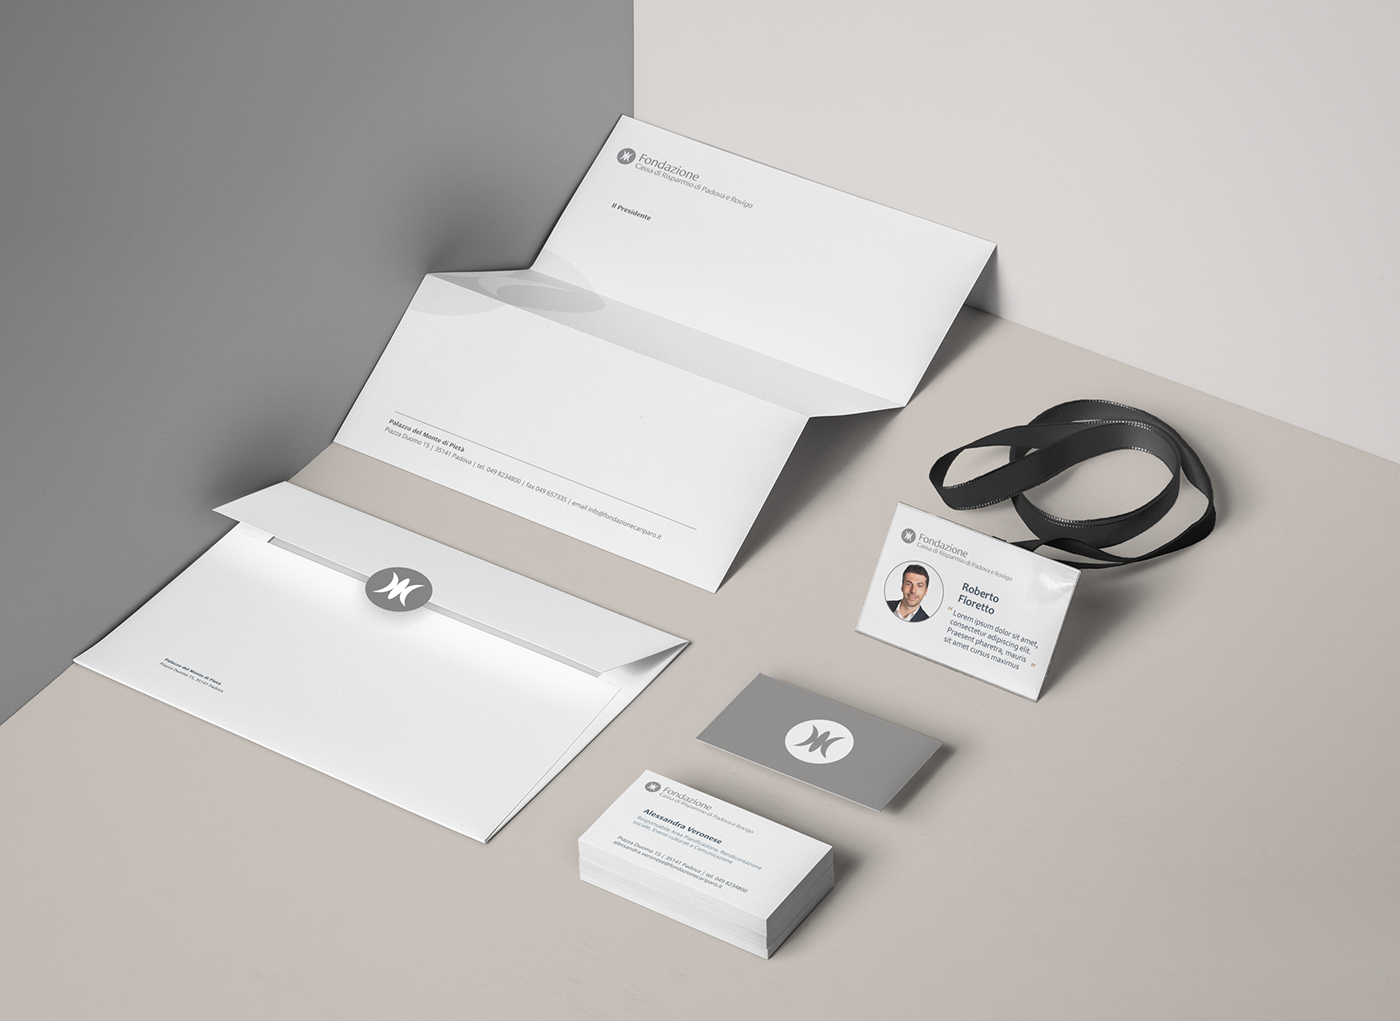 branding  Italy identity icons corporate inspiration RESTYLING institution logo design